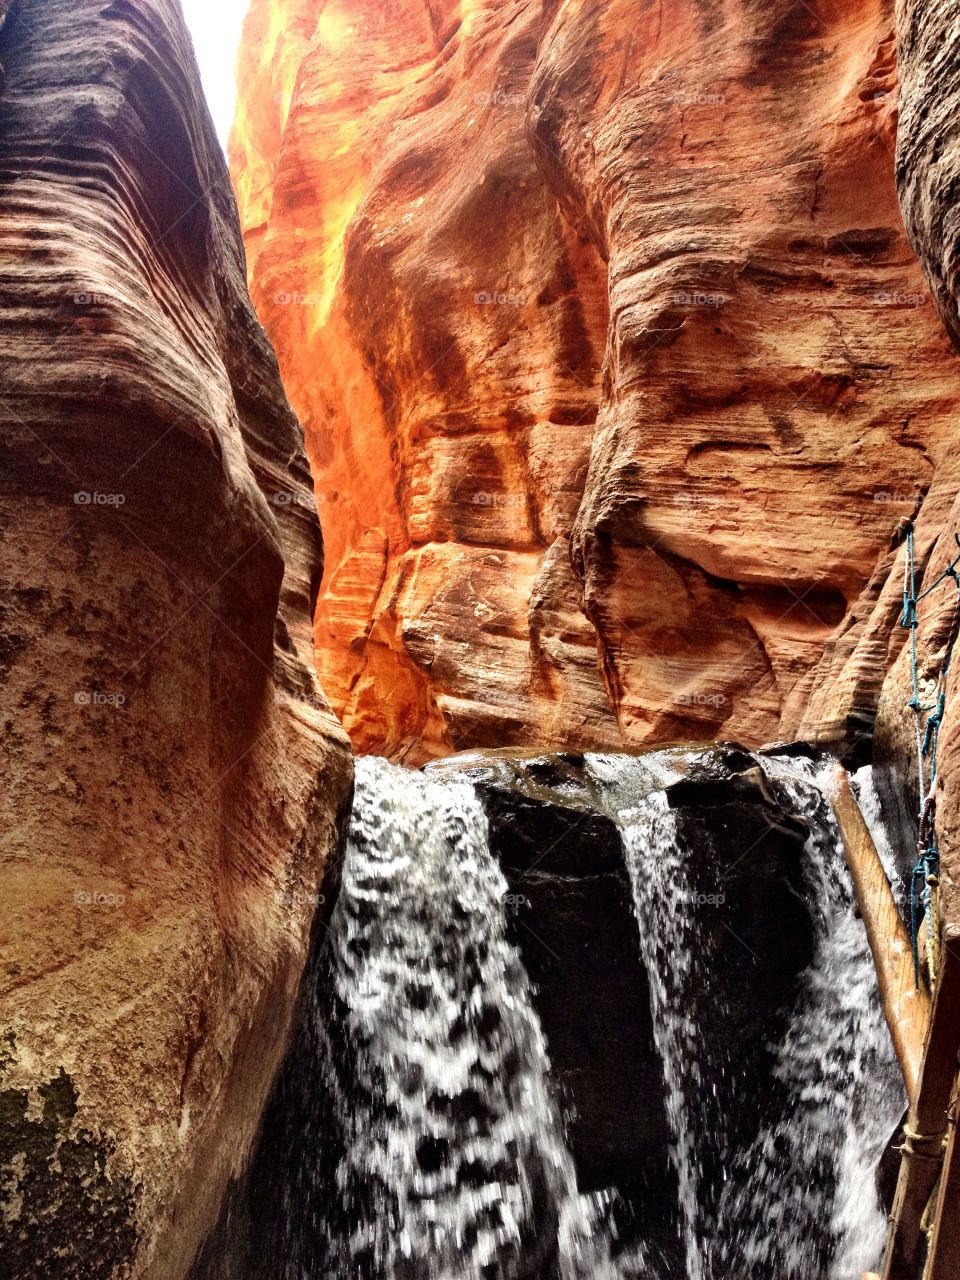 Waterfall in a slot canyon 